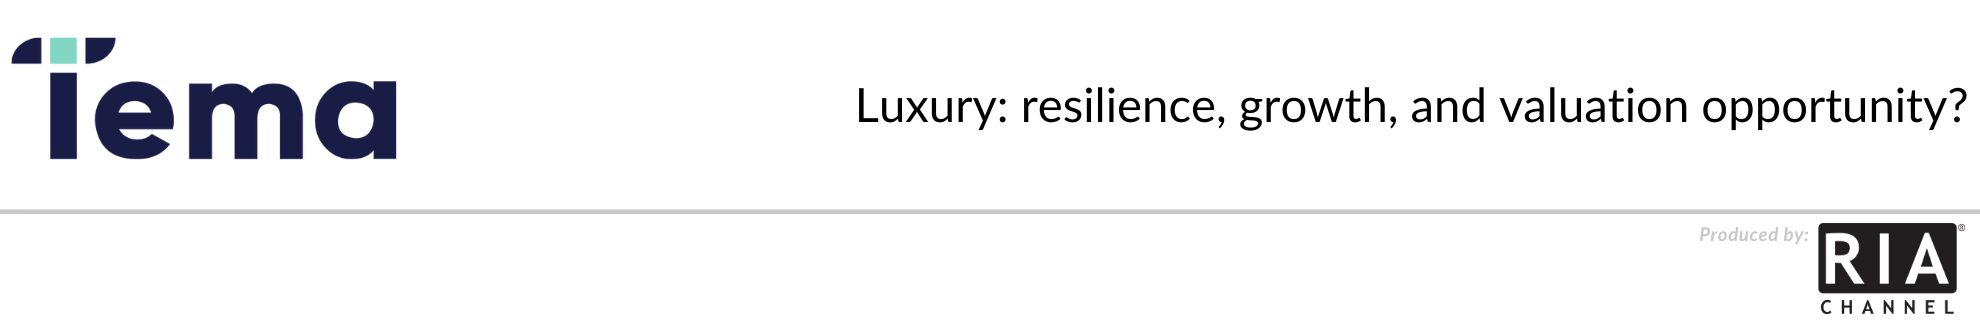 Luxury: resilience, growth, and valuation opportunity?